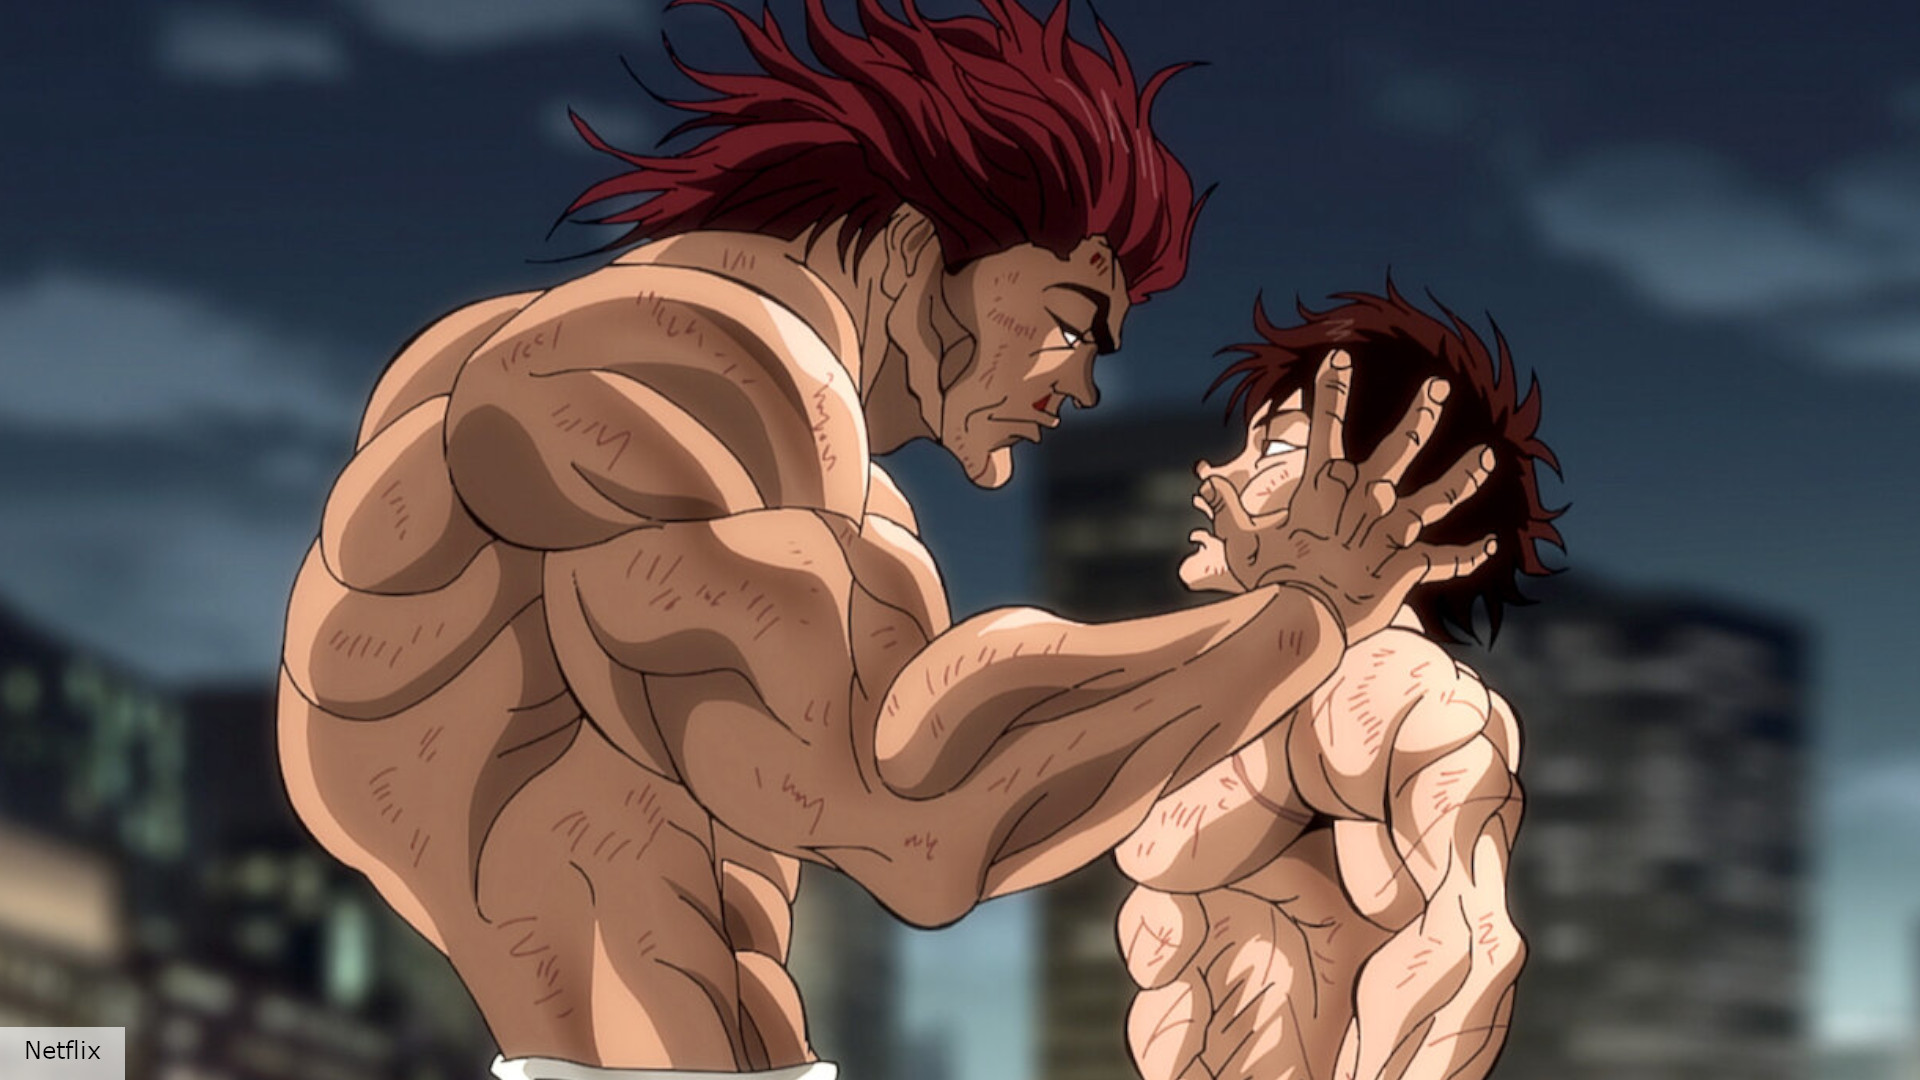 Kengan Ashura season 3 release date speculation, cast, plot, and news